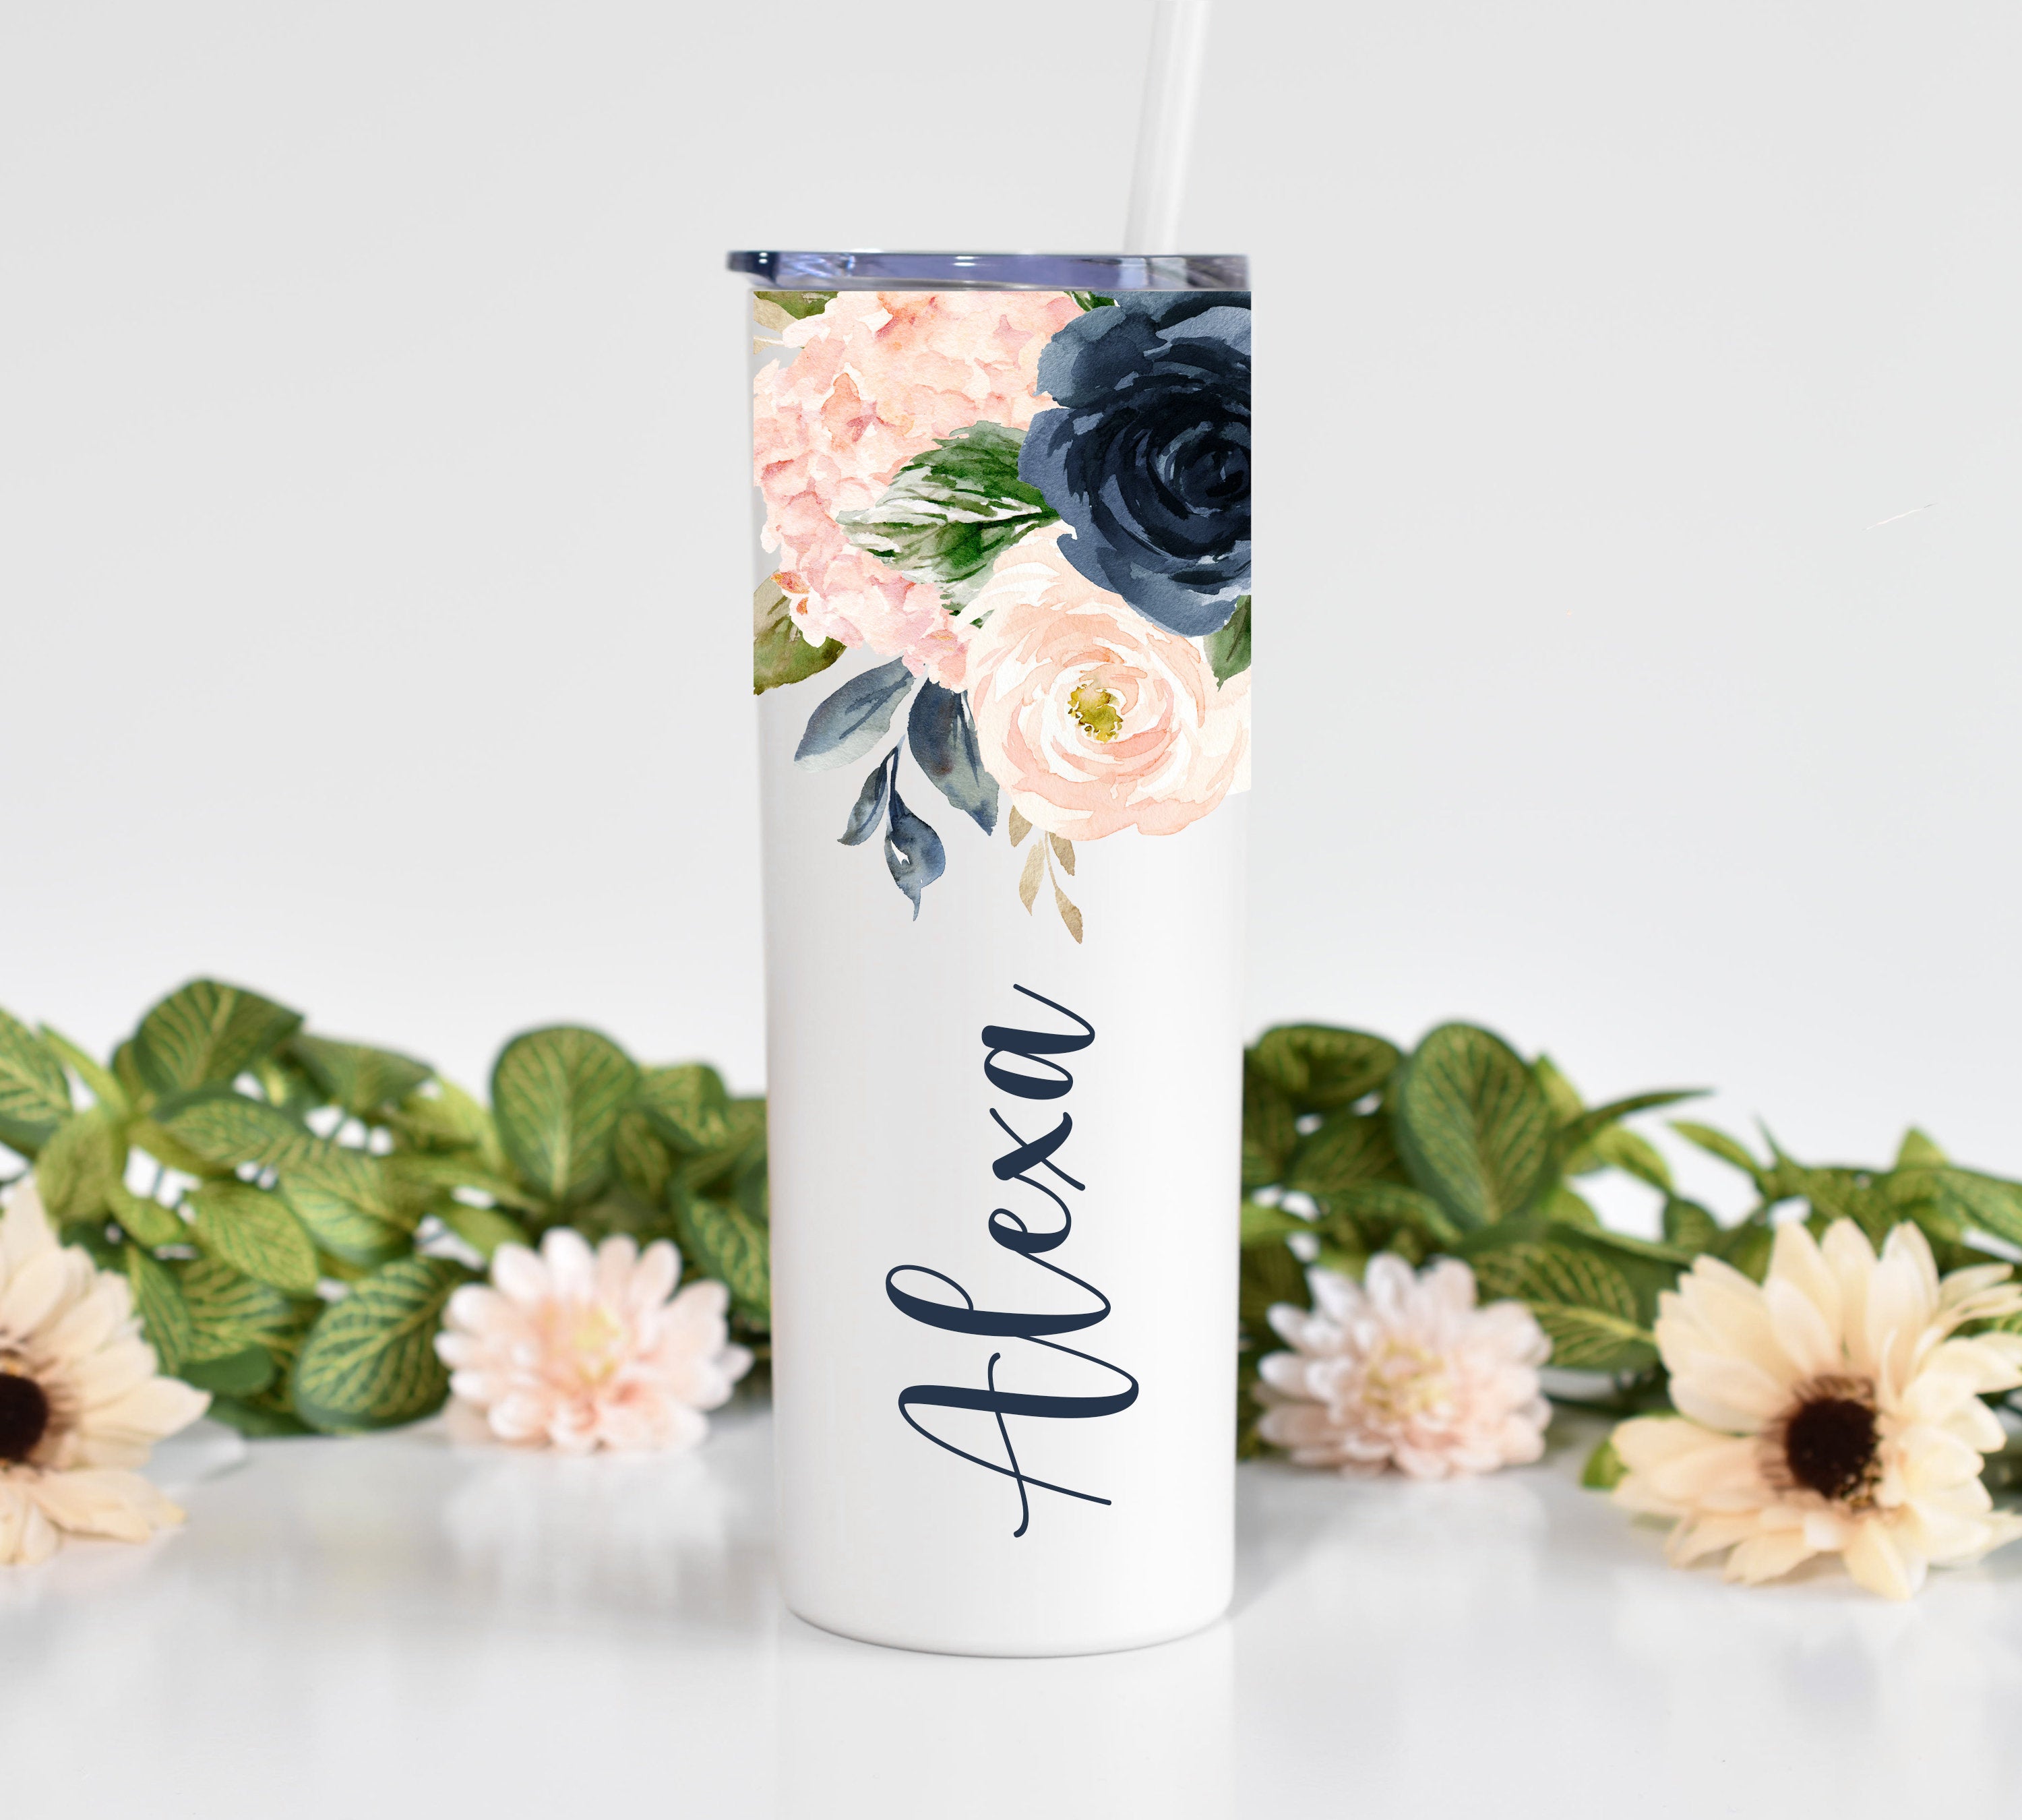 Custom Bridal Party Tumbler Bridal Party Gift Bridesmaid Gift Bachelorette Party Favors Bridesmaid Proposal Bridesmaid Tumbler